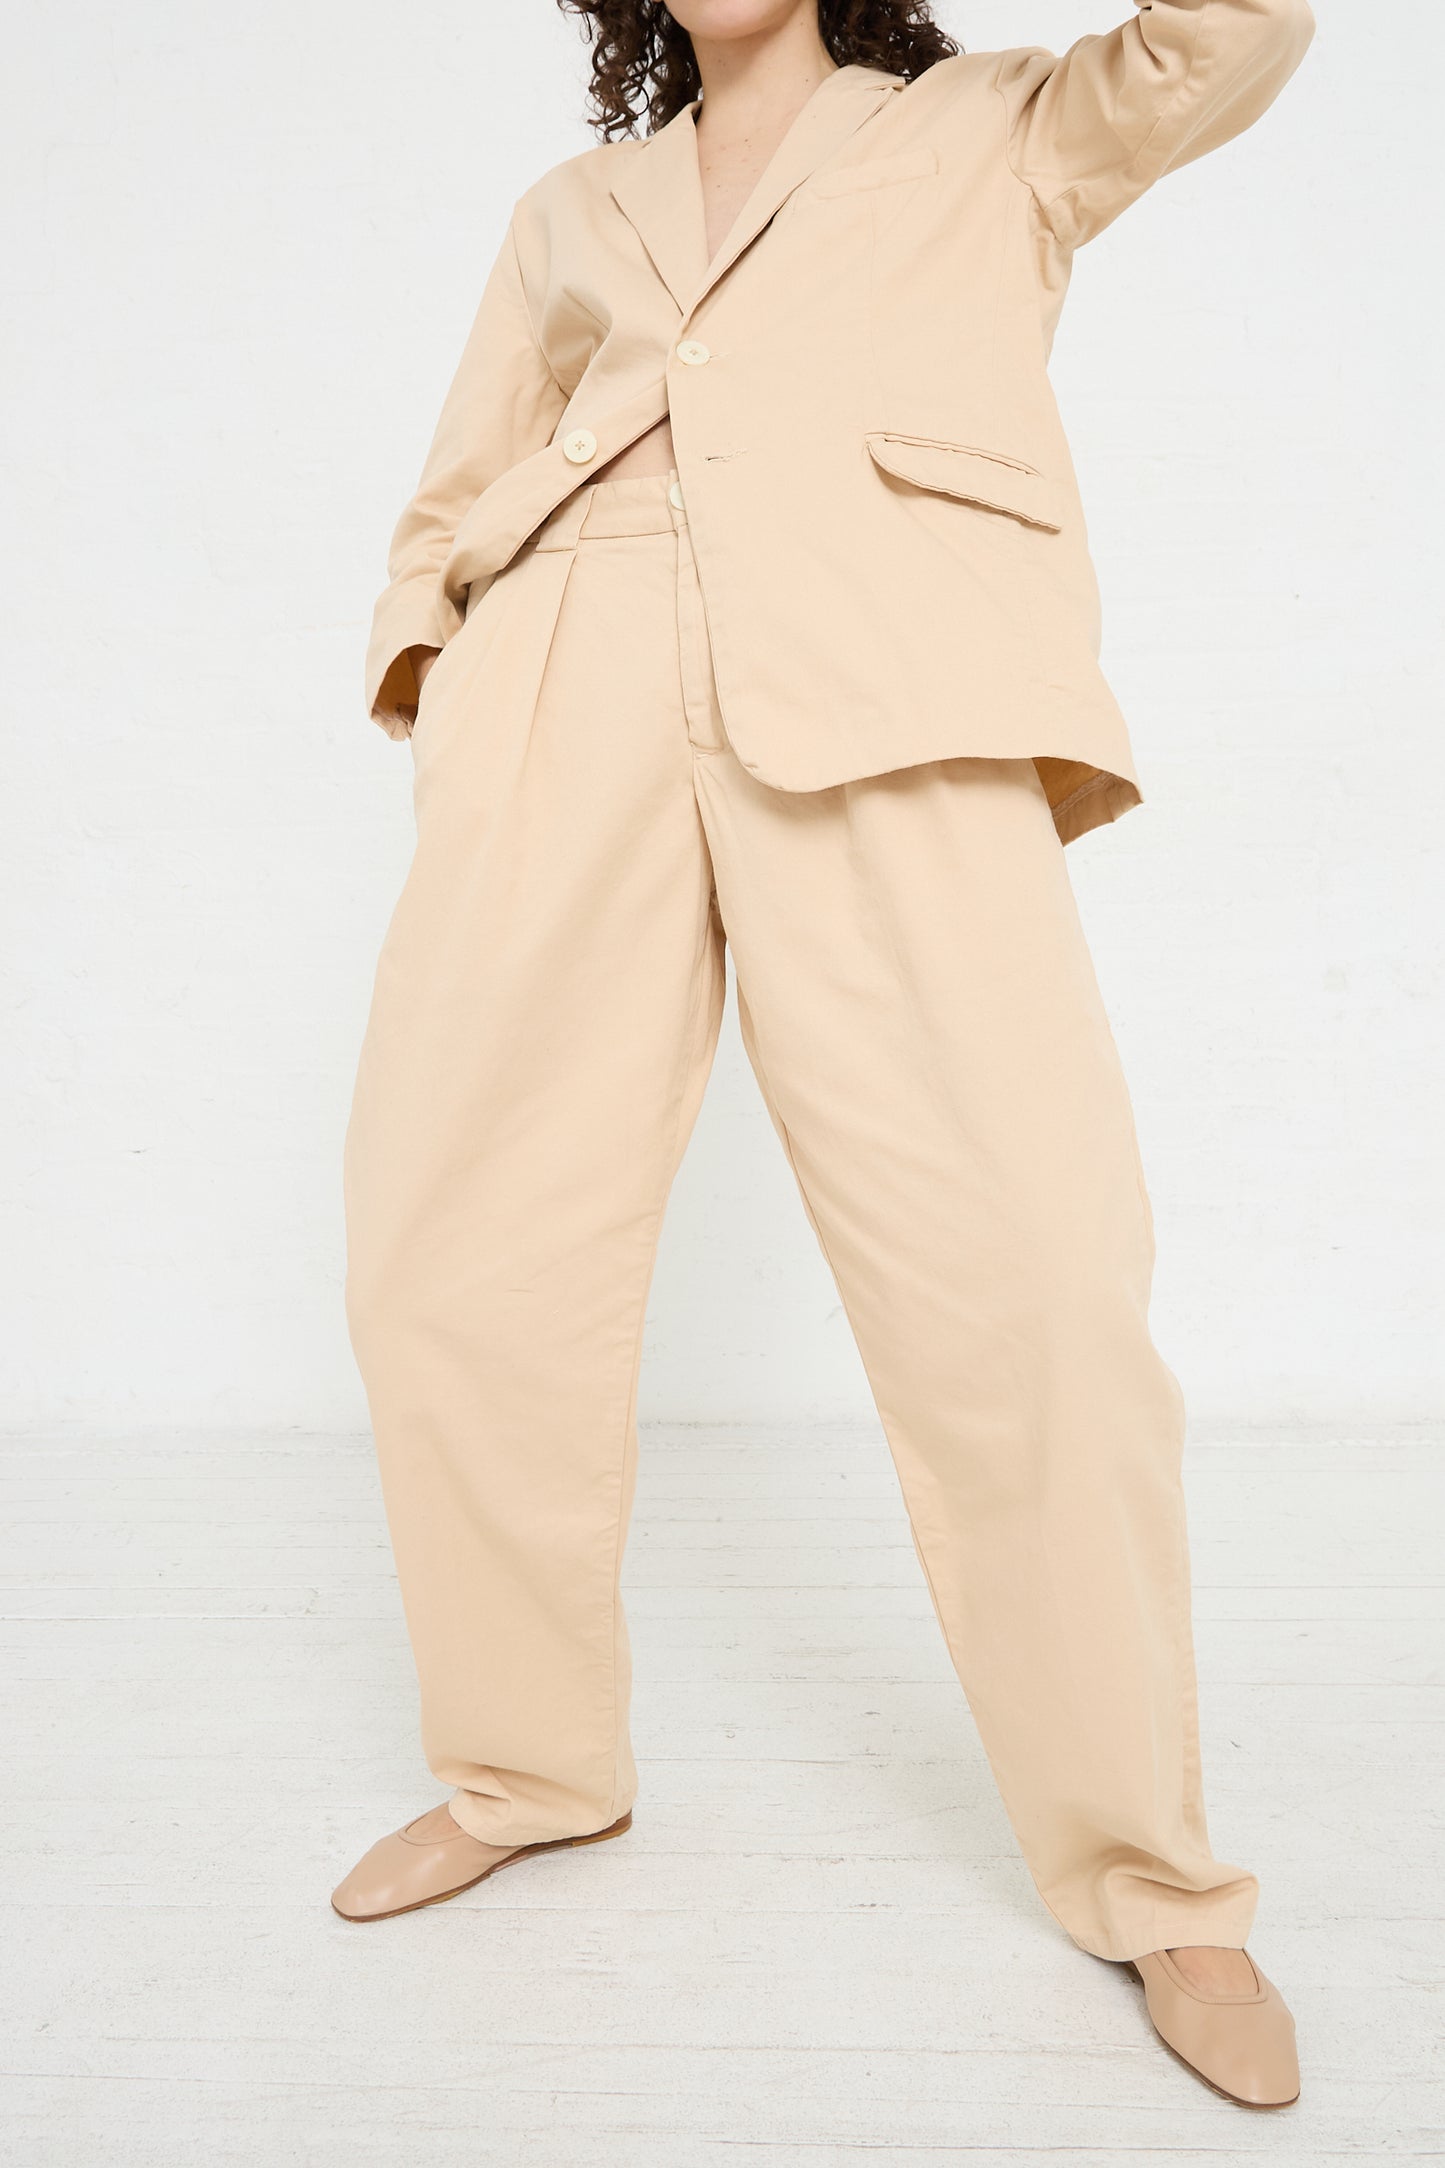 A woman wearing Jesse Kamm's The Trouser in Buff and a minimalist tan blazer with tapered legs.